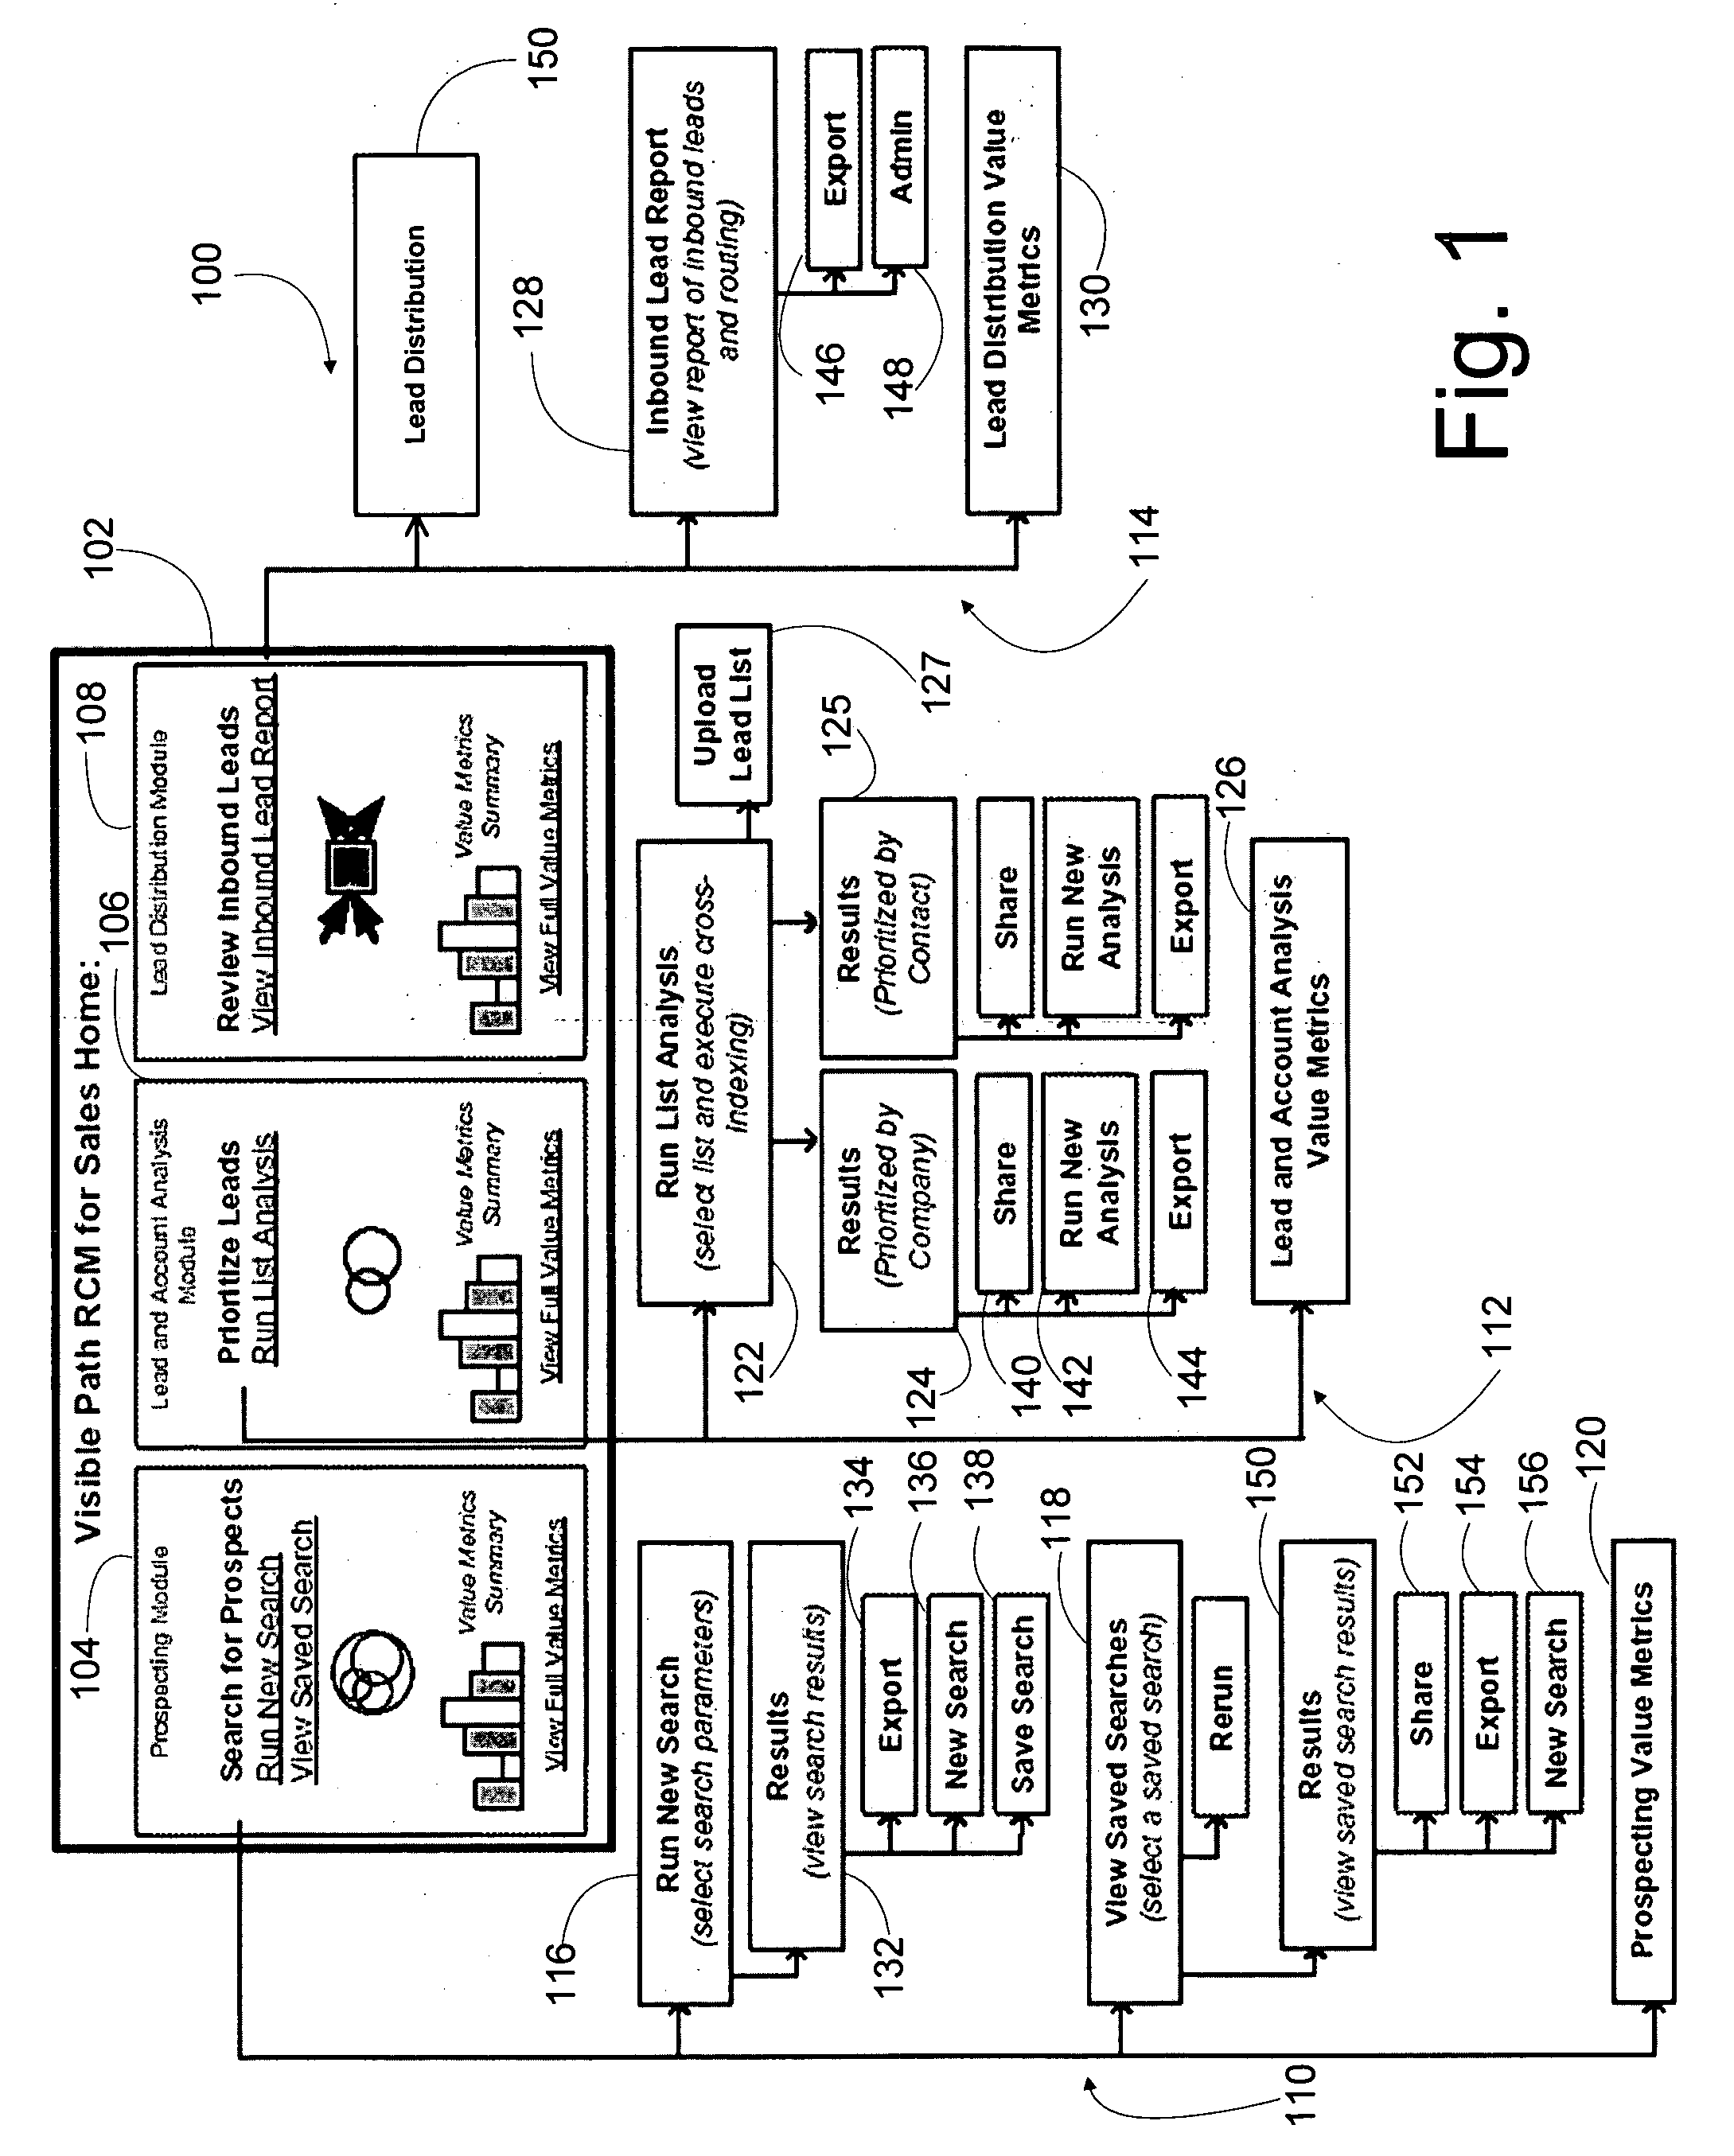 System and method for using social networks to facilitate business processes